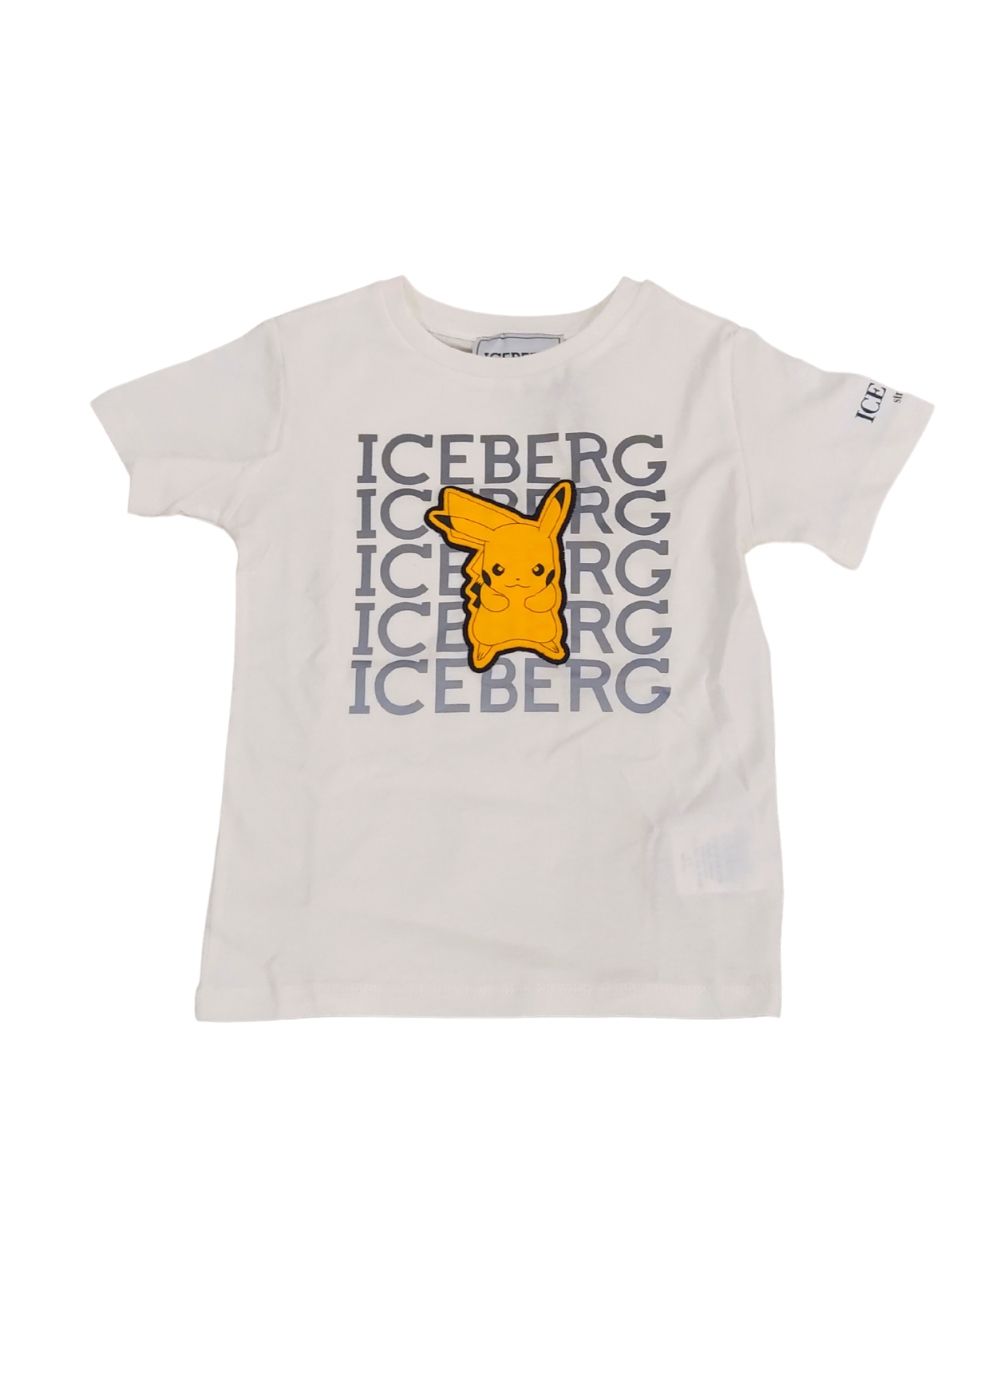 Featured image for “Iceberg T-shirt Pikachu”